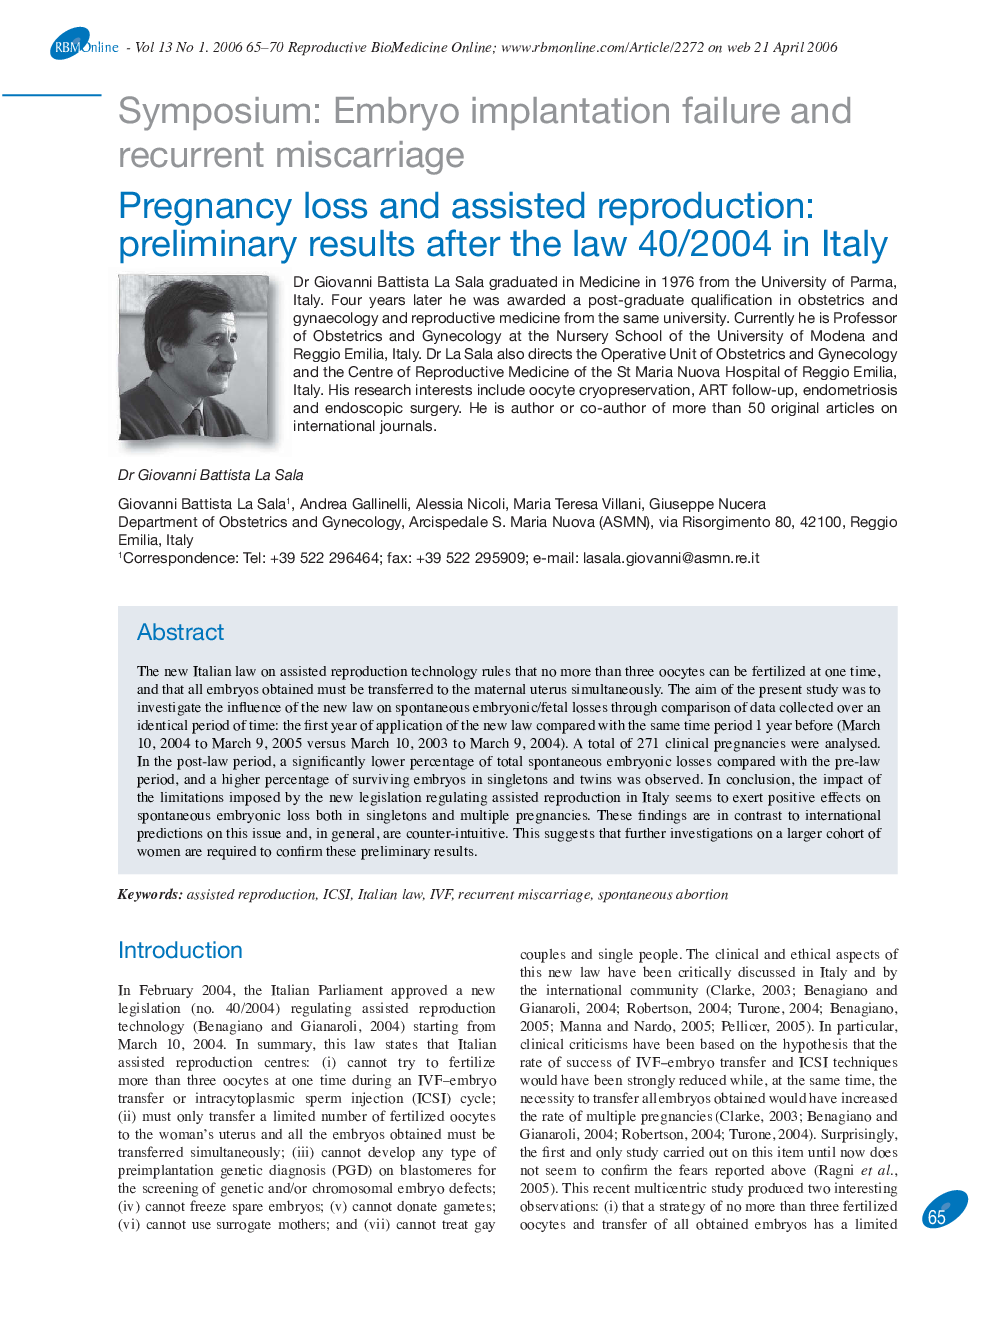 Pregnancy loss and assisted reproduction: preliminary results after the law 40/2004 in Italy